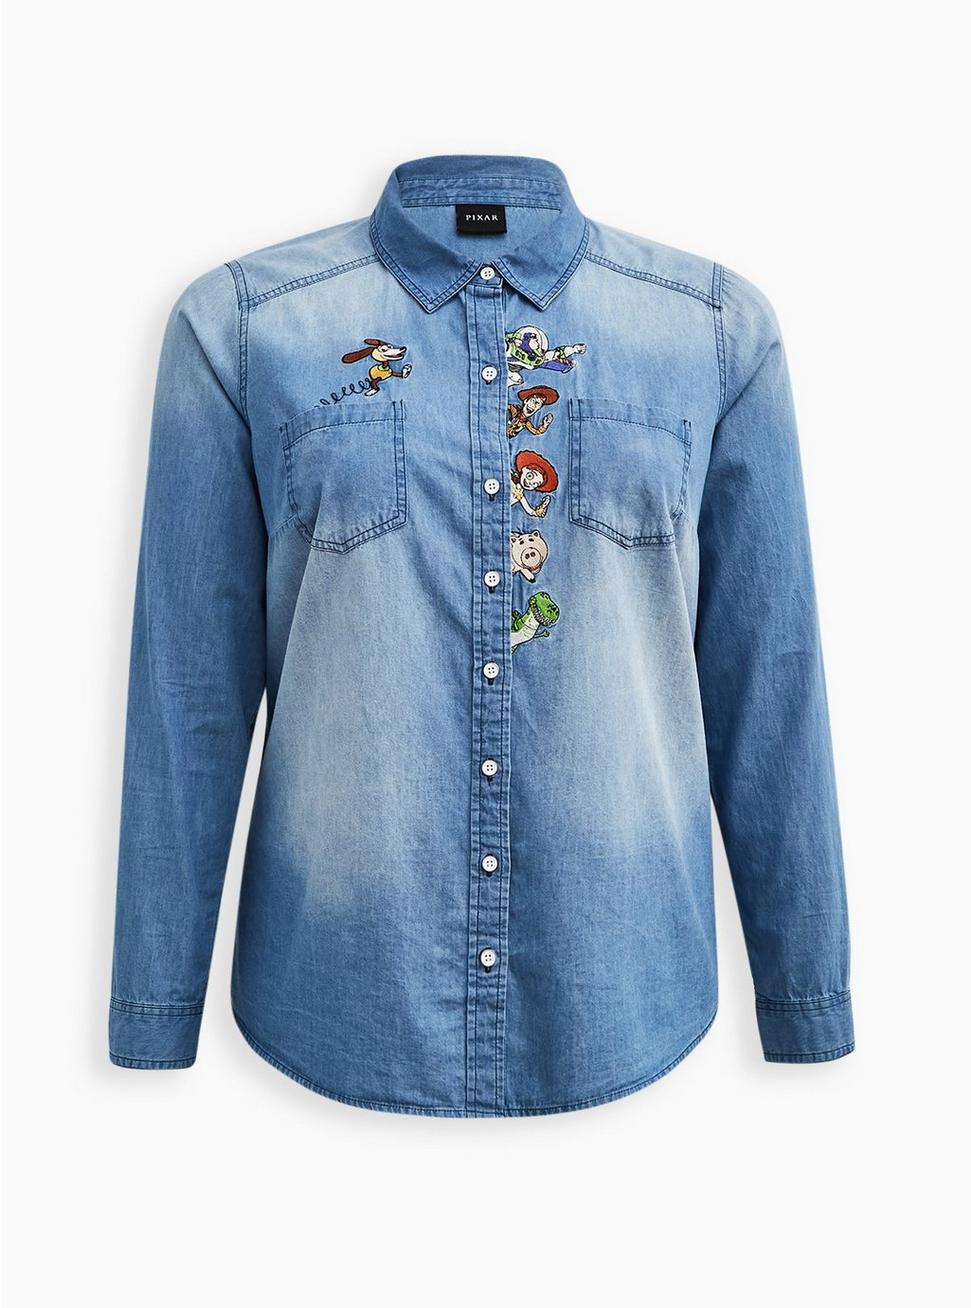 Disney Pixar Toy Story Button Down Top - Chambray Denim Toy Story Light Wash, MULTI, hi-res